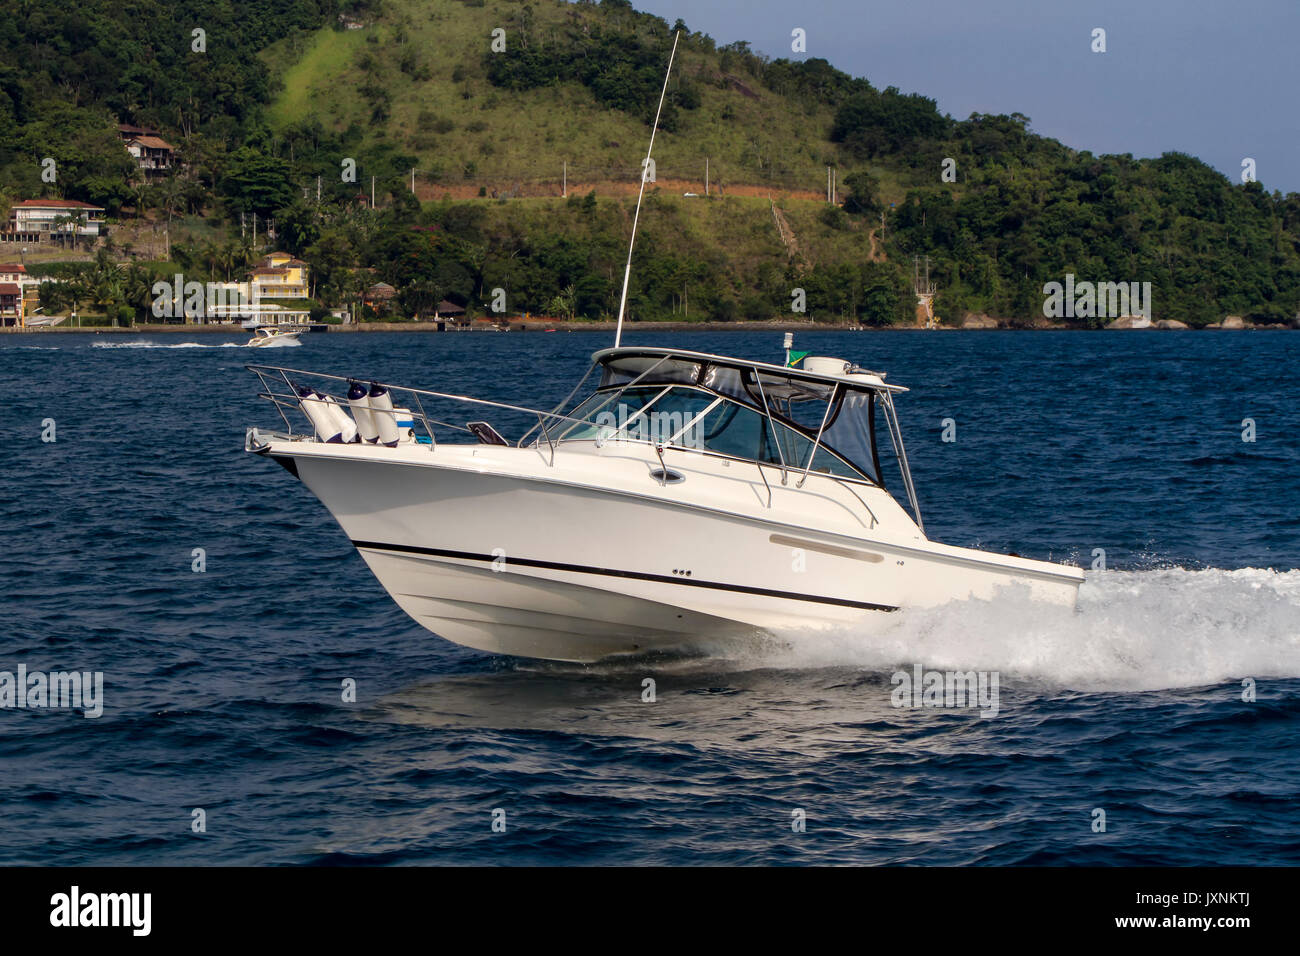 Motor Boat in Angra dos Reis bay area during the summer time Stock Photo